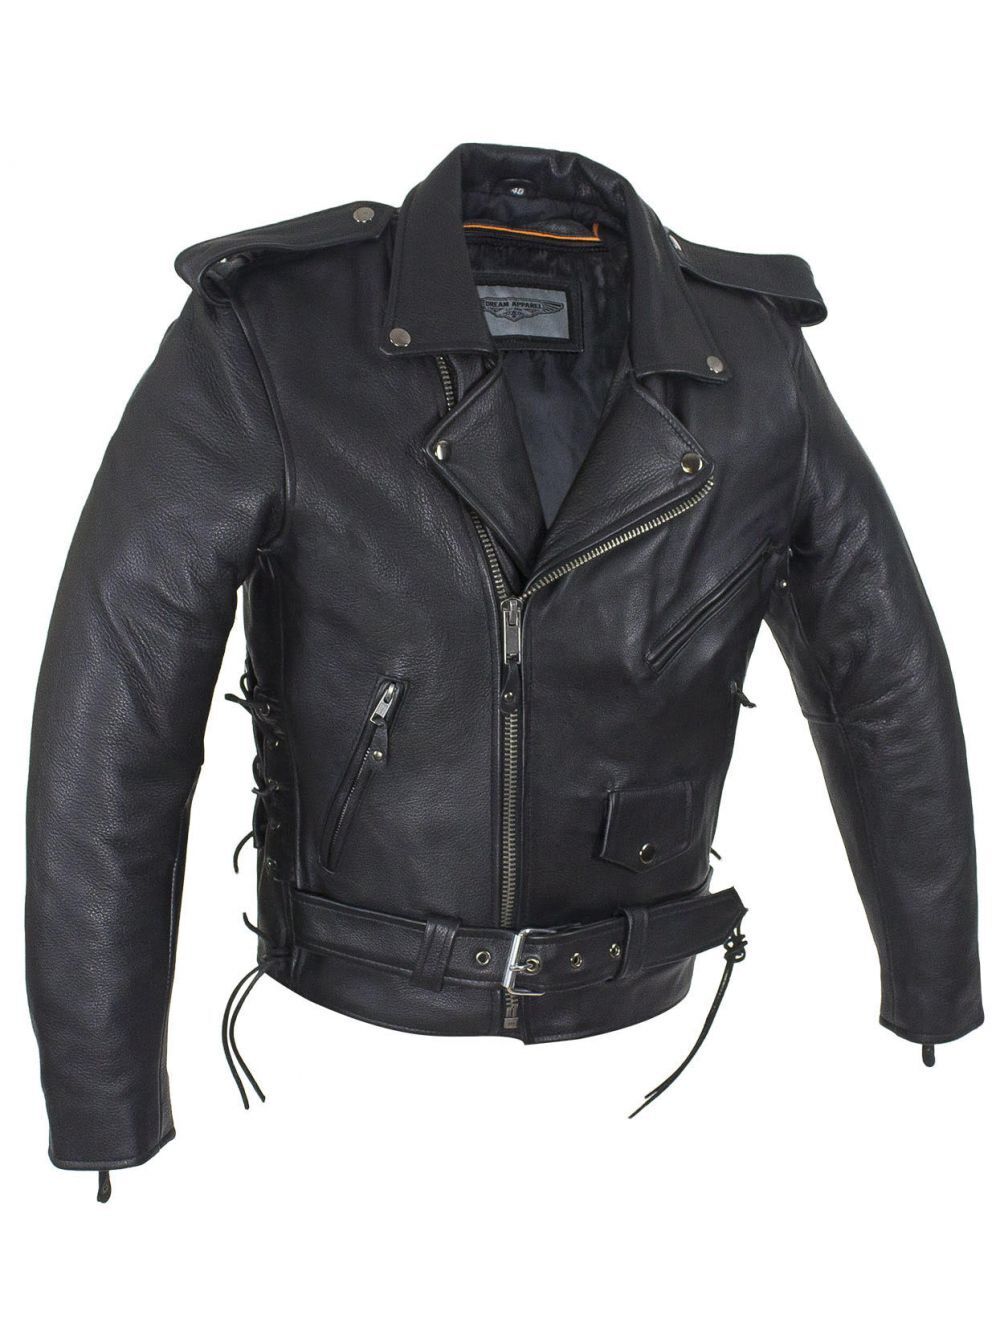 Mens Classic Police Style Motorcycle Jacket With Side Laces, Conceal Carry Gu...